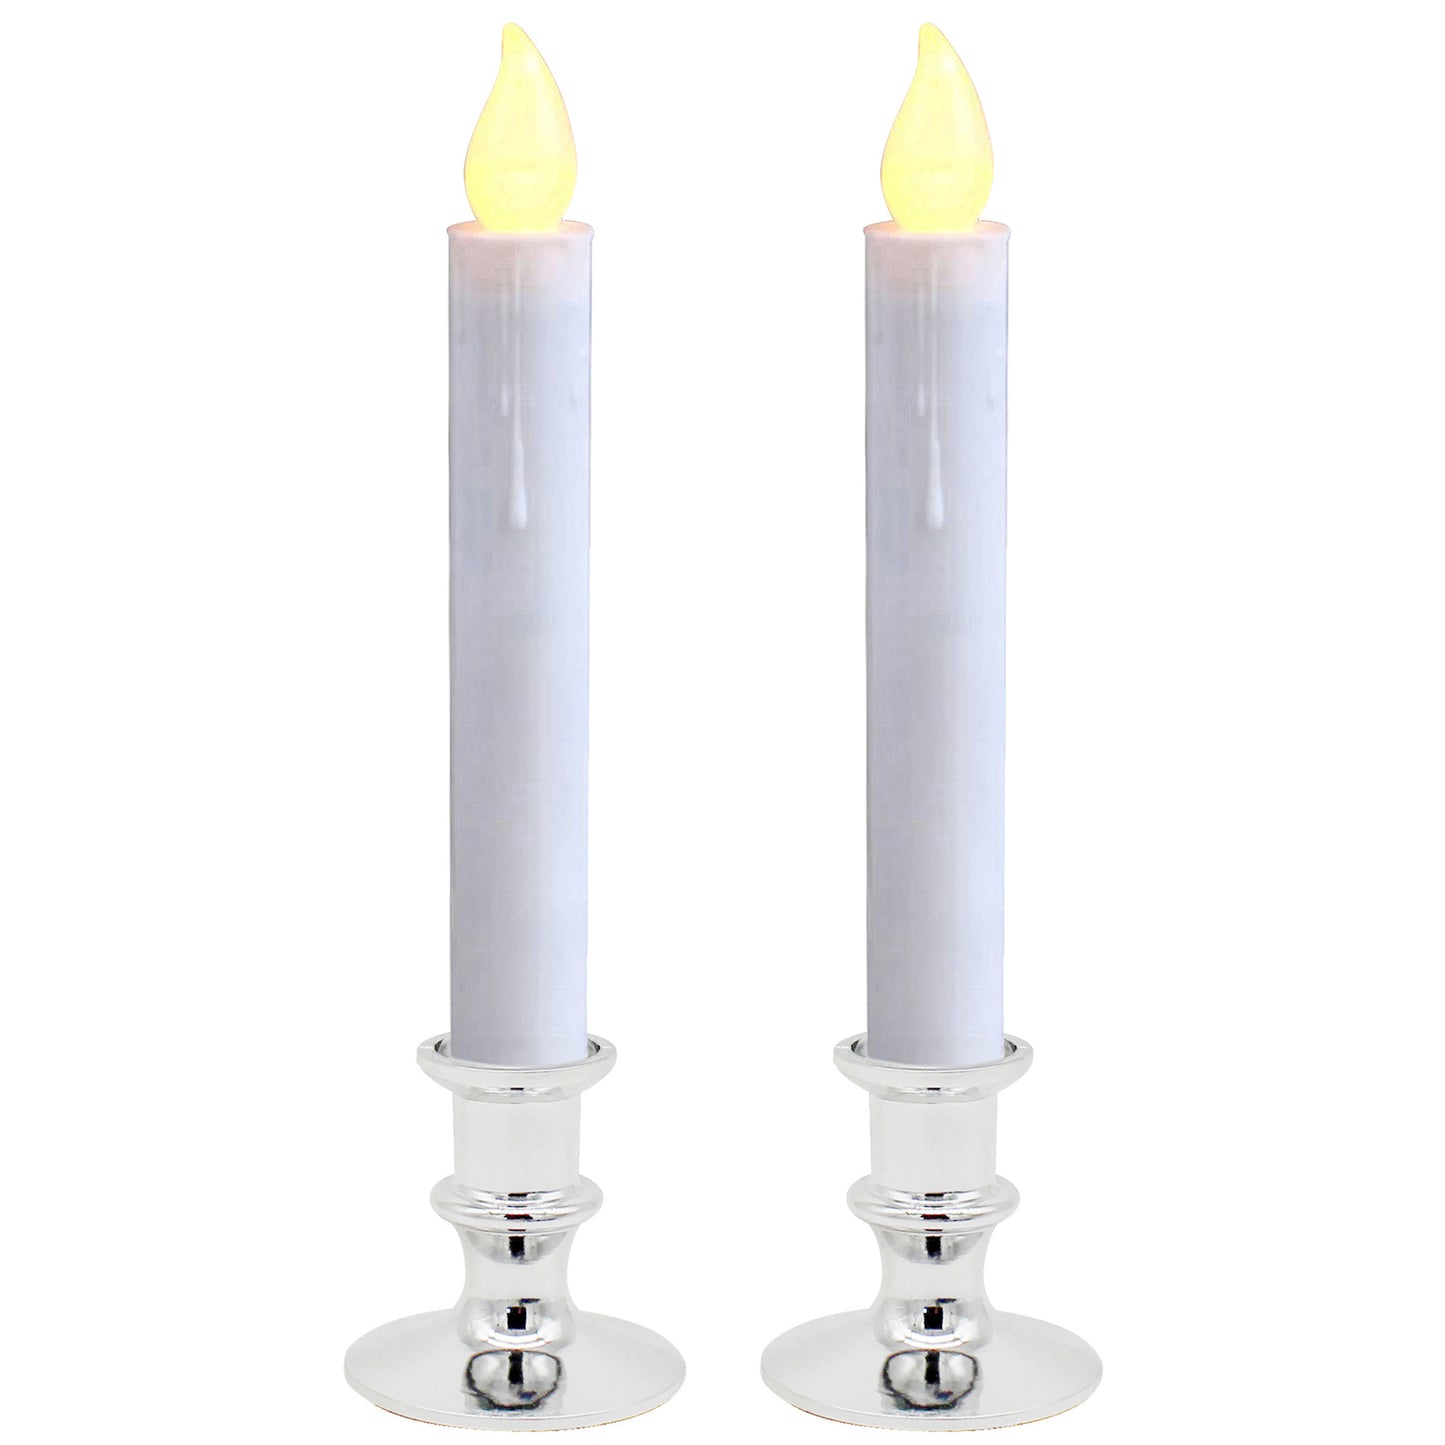 CVHOMEDECO. Battery Operated LED Window Candles, Auto On/Off, Silver Plastic Base, Flickering Warm Orange Flameless Lights Decor. (2 Pack)